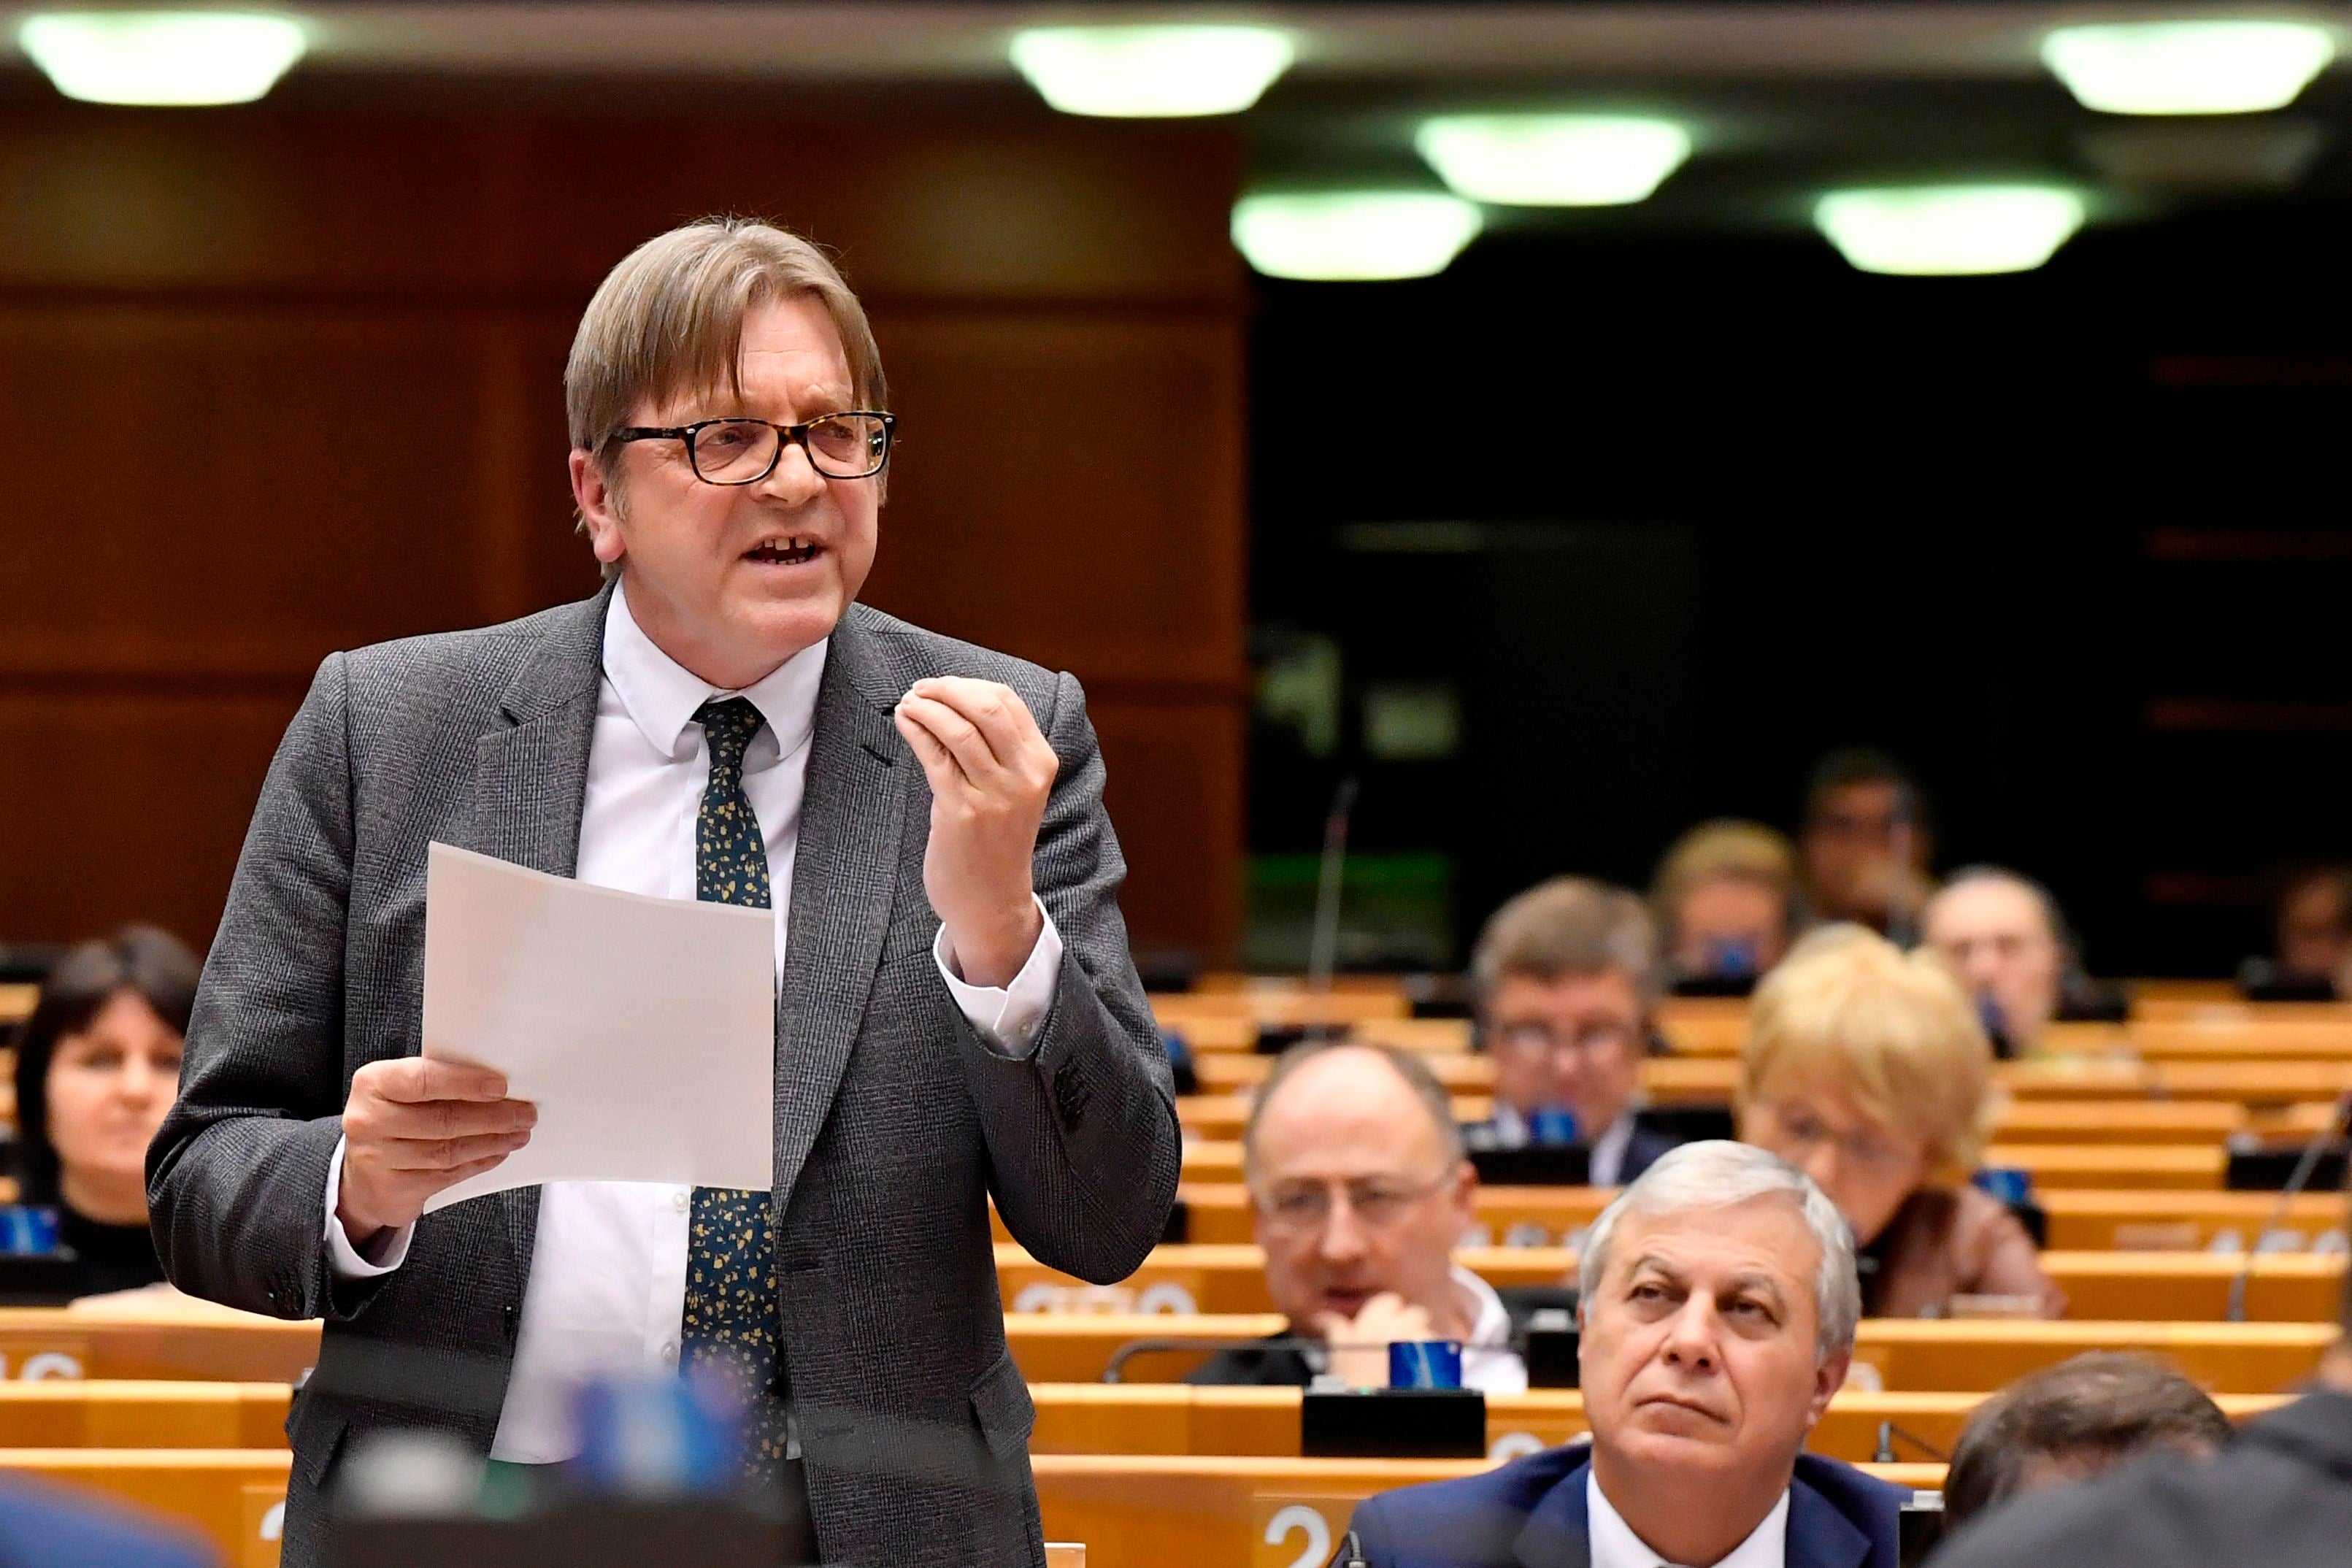 MEP Guy Verhofstadt furious at policies by Orban’s government